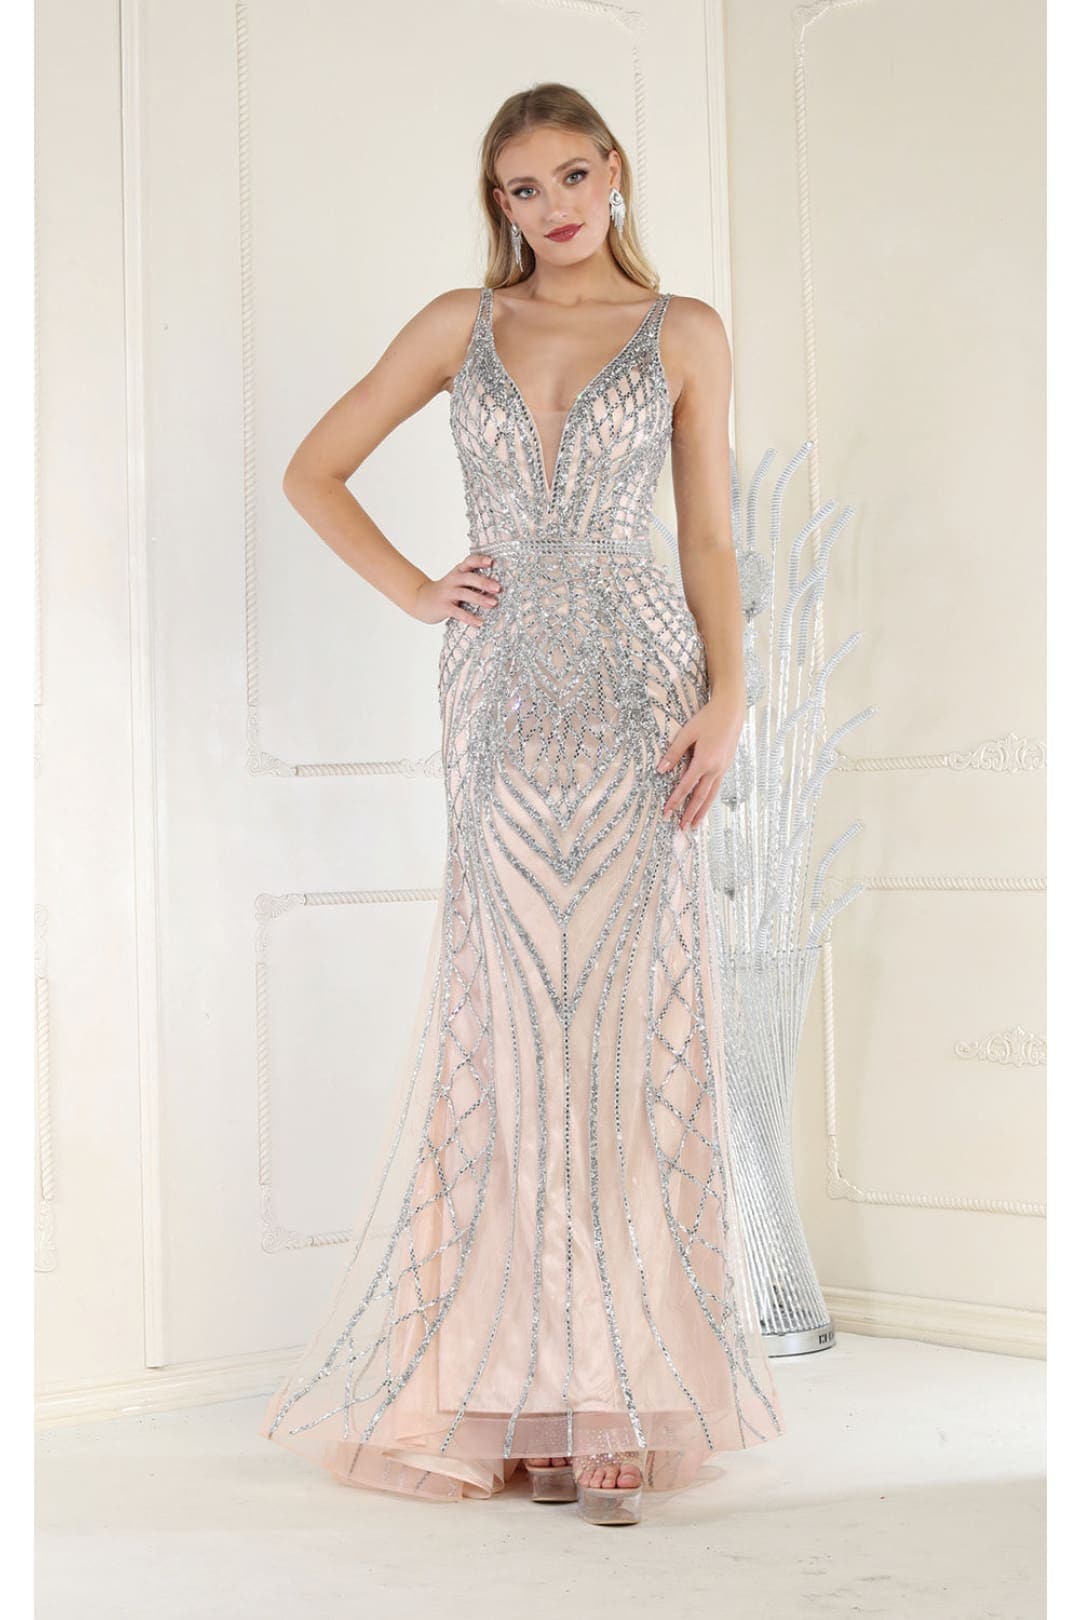 Royal Queen RQ7931 Embellished Sleeveless Porm Gown - Dress